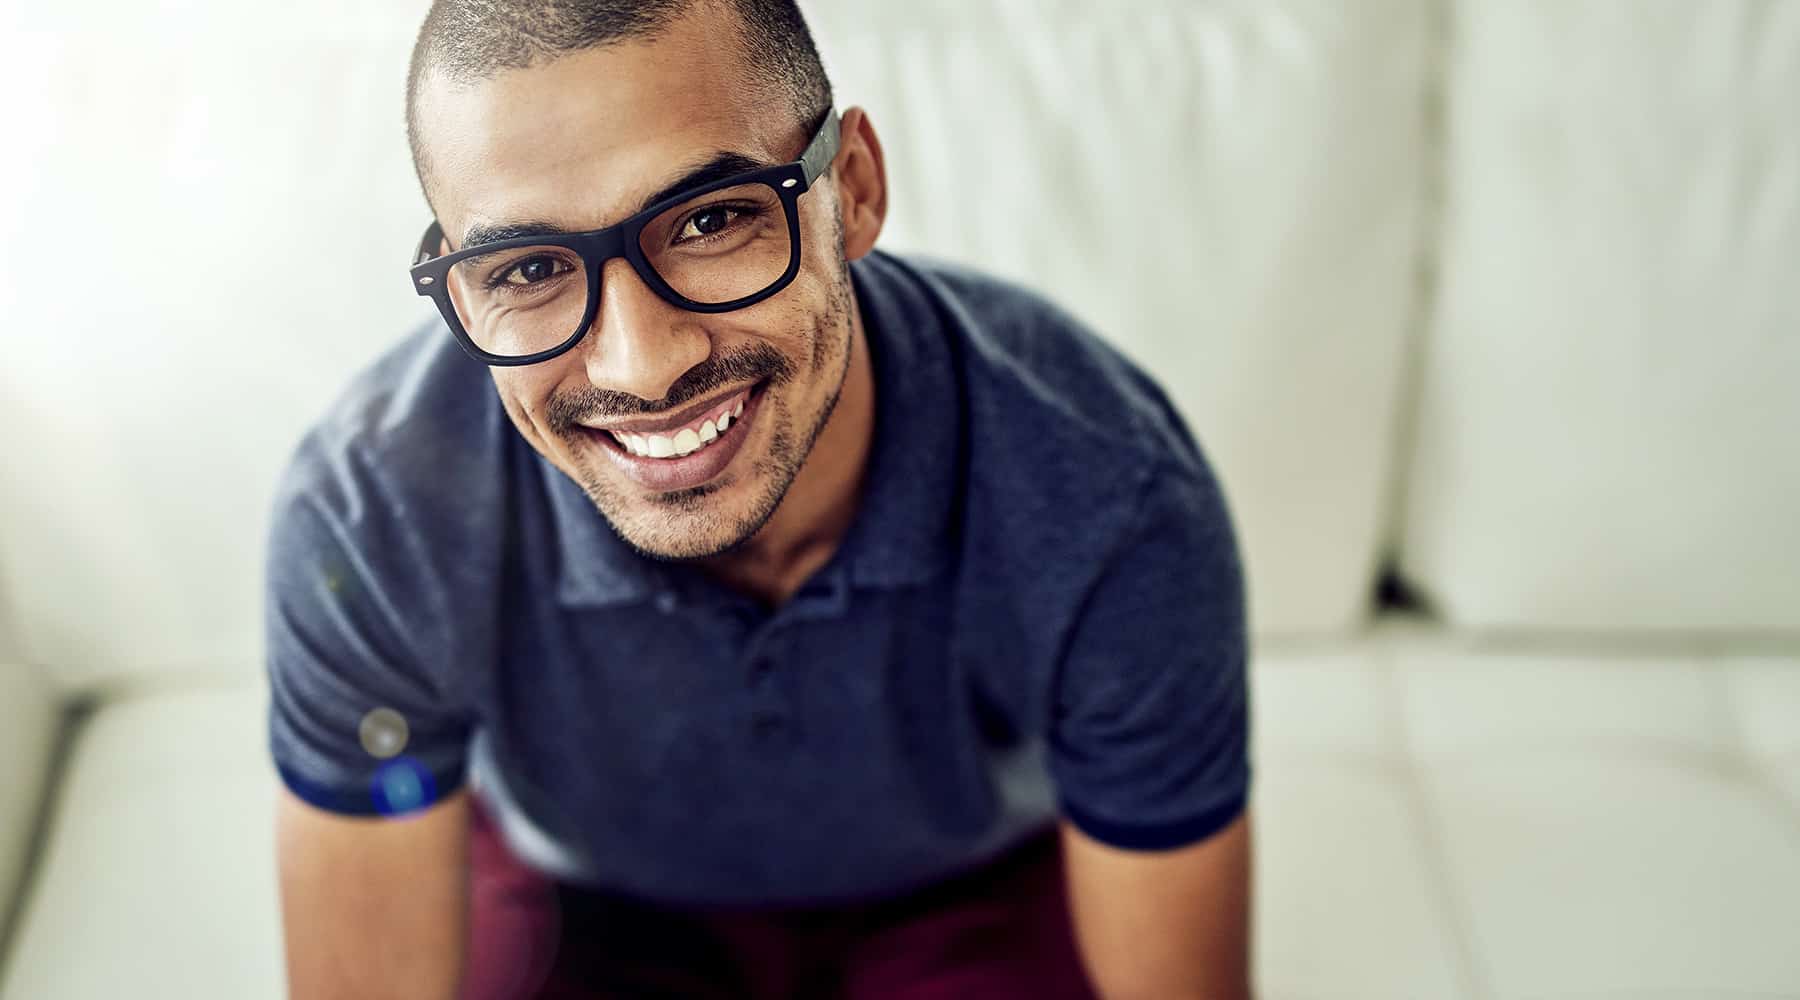 Young man in a blue collard shirt wearing glasses and smiling